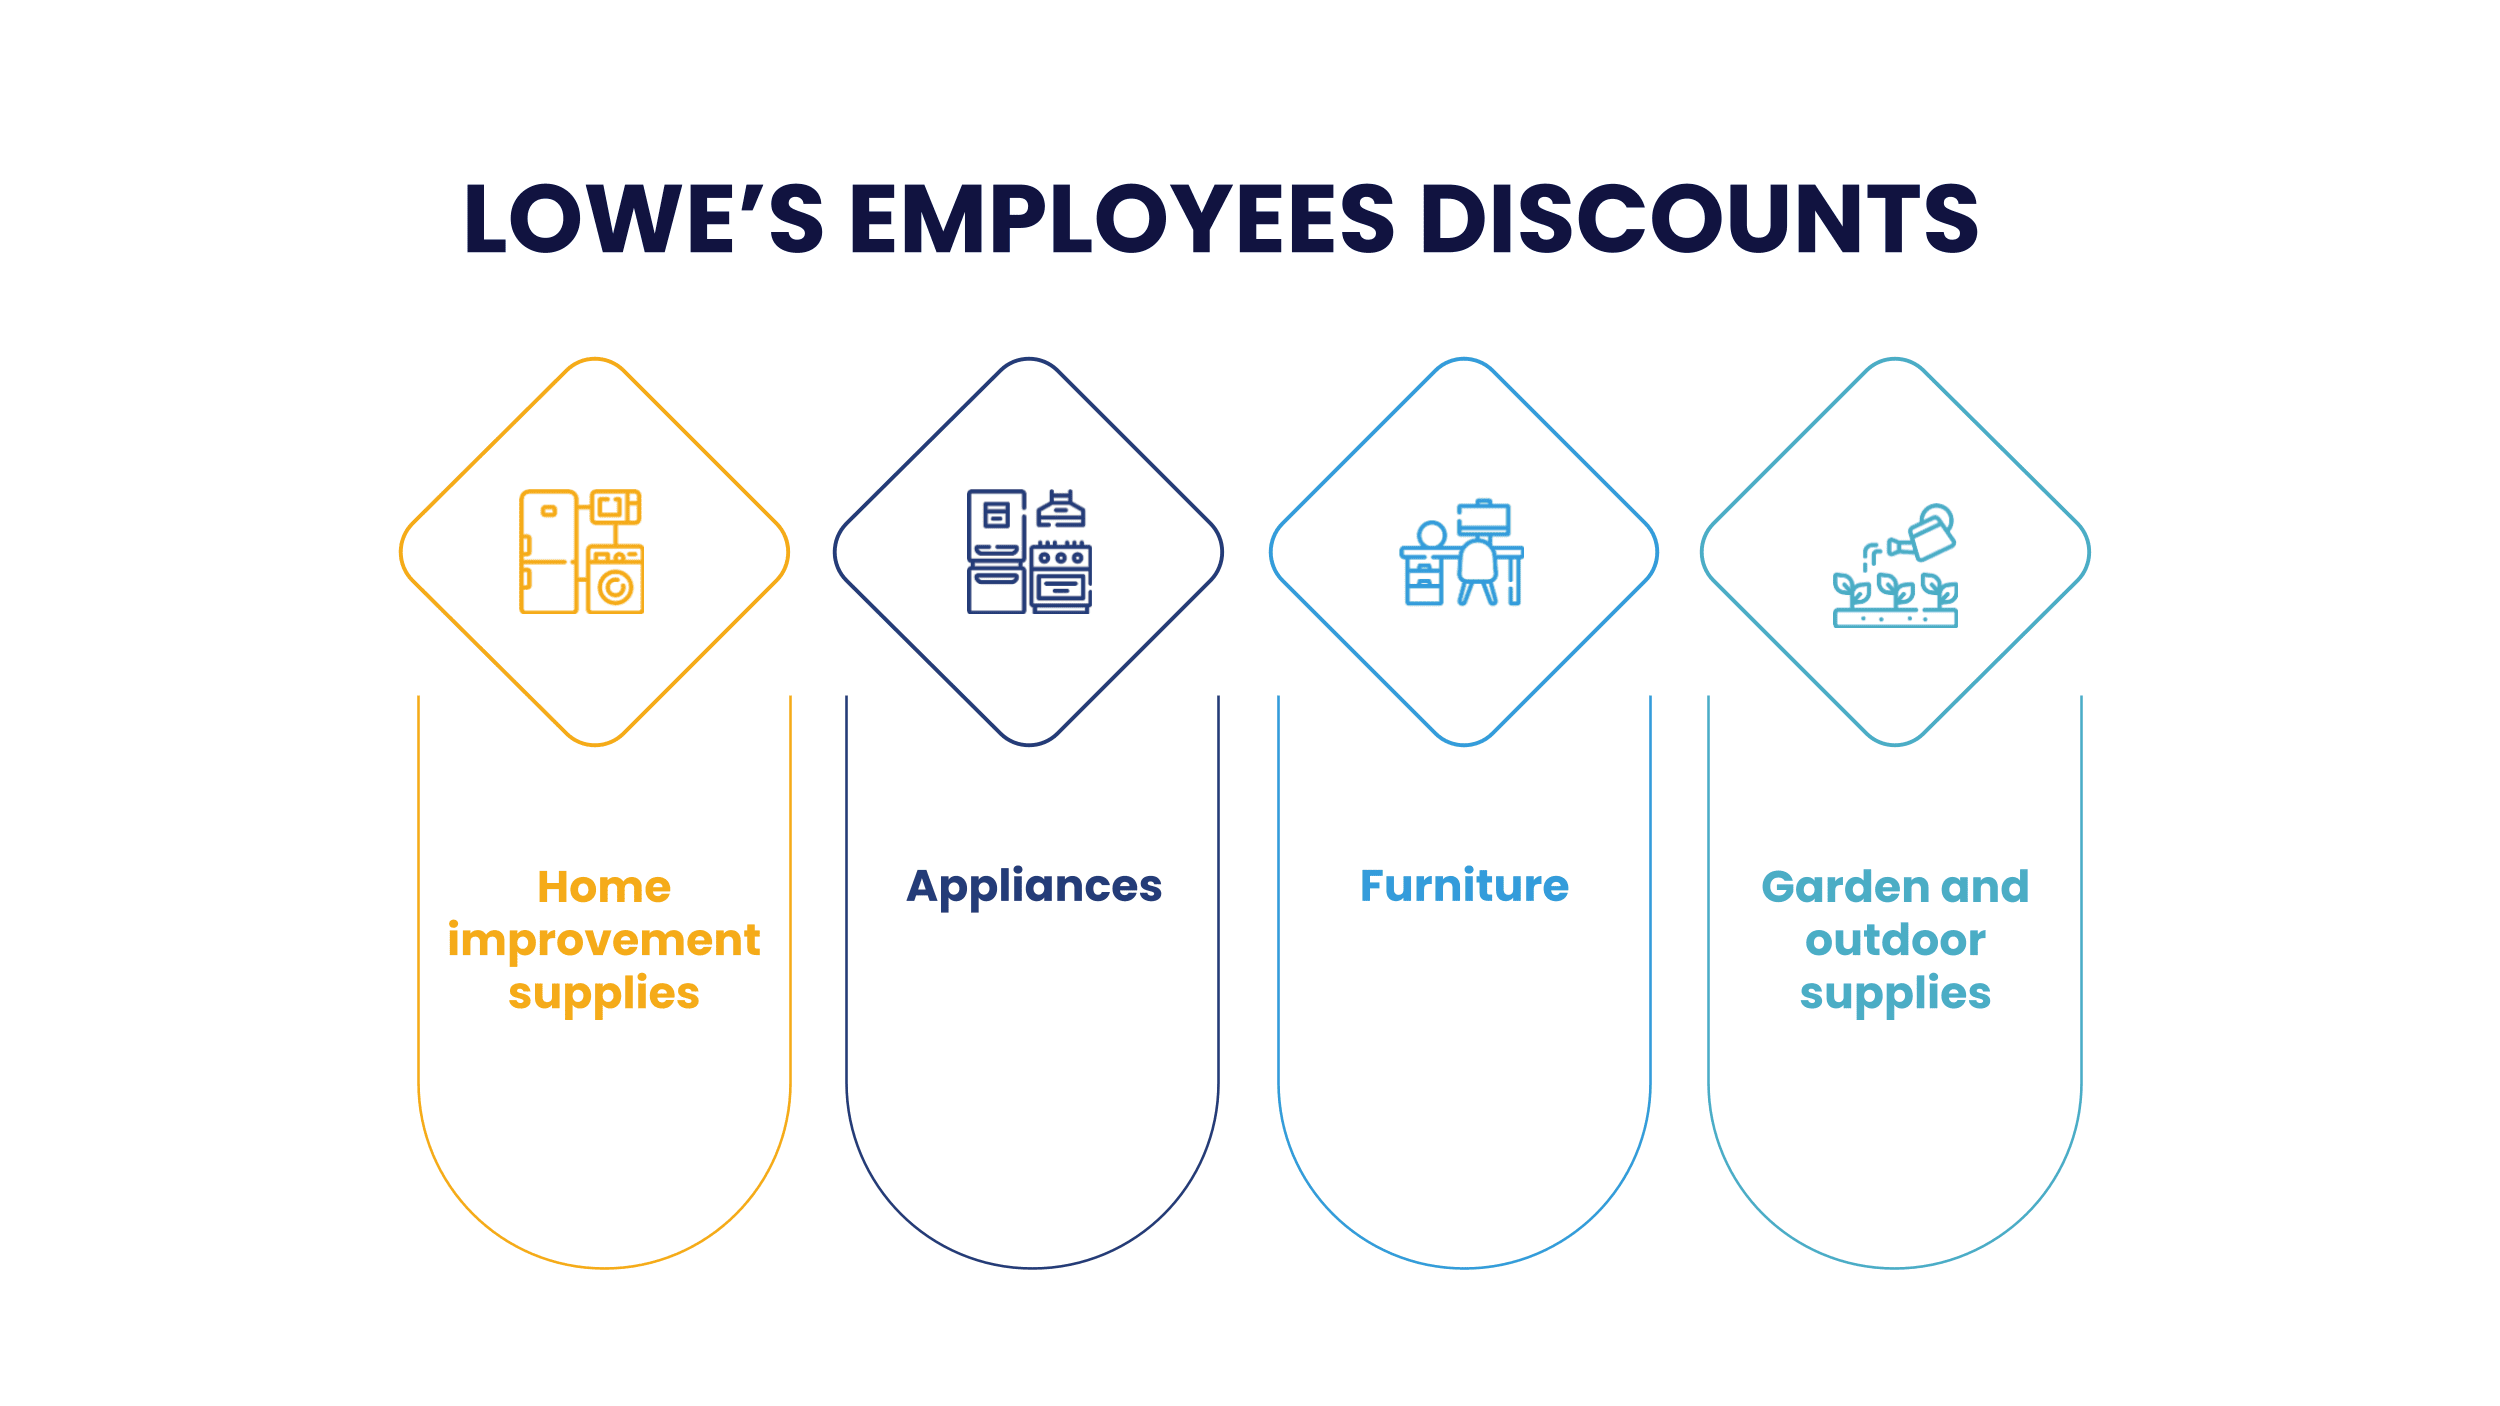 Lowes Employee Benefits and Perks